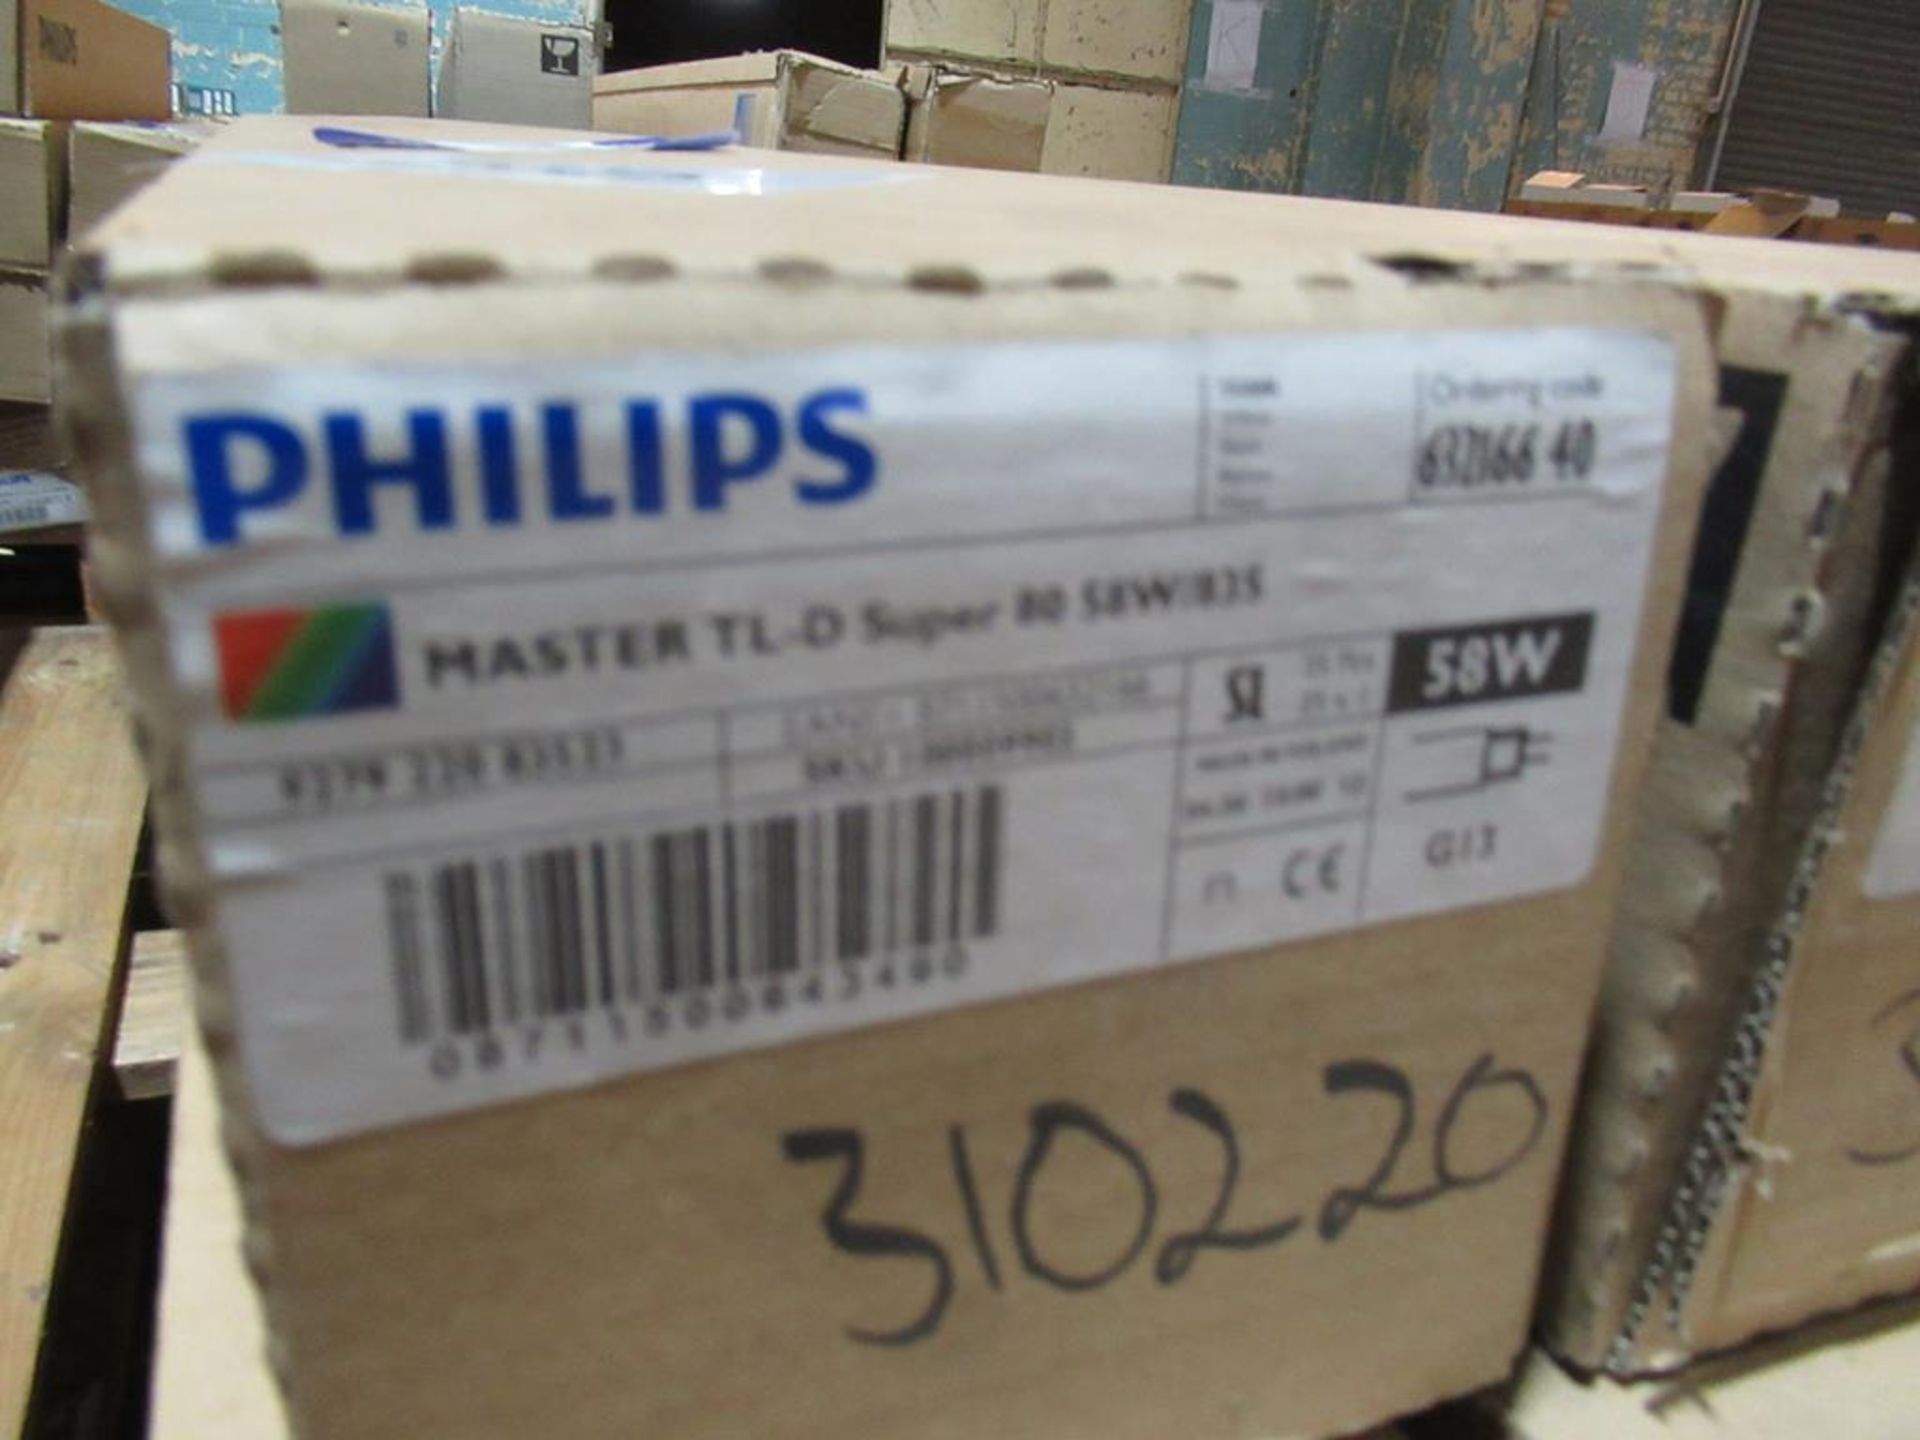 150 x Philips Master Tl-D Super 80 58W835 G13 3500K OEM Trade Price £225 - Image 2 of 2